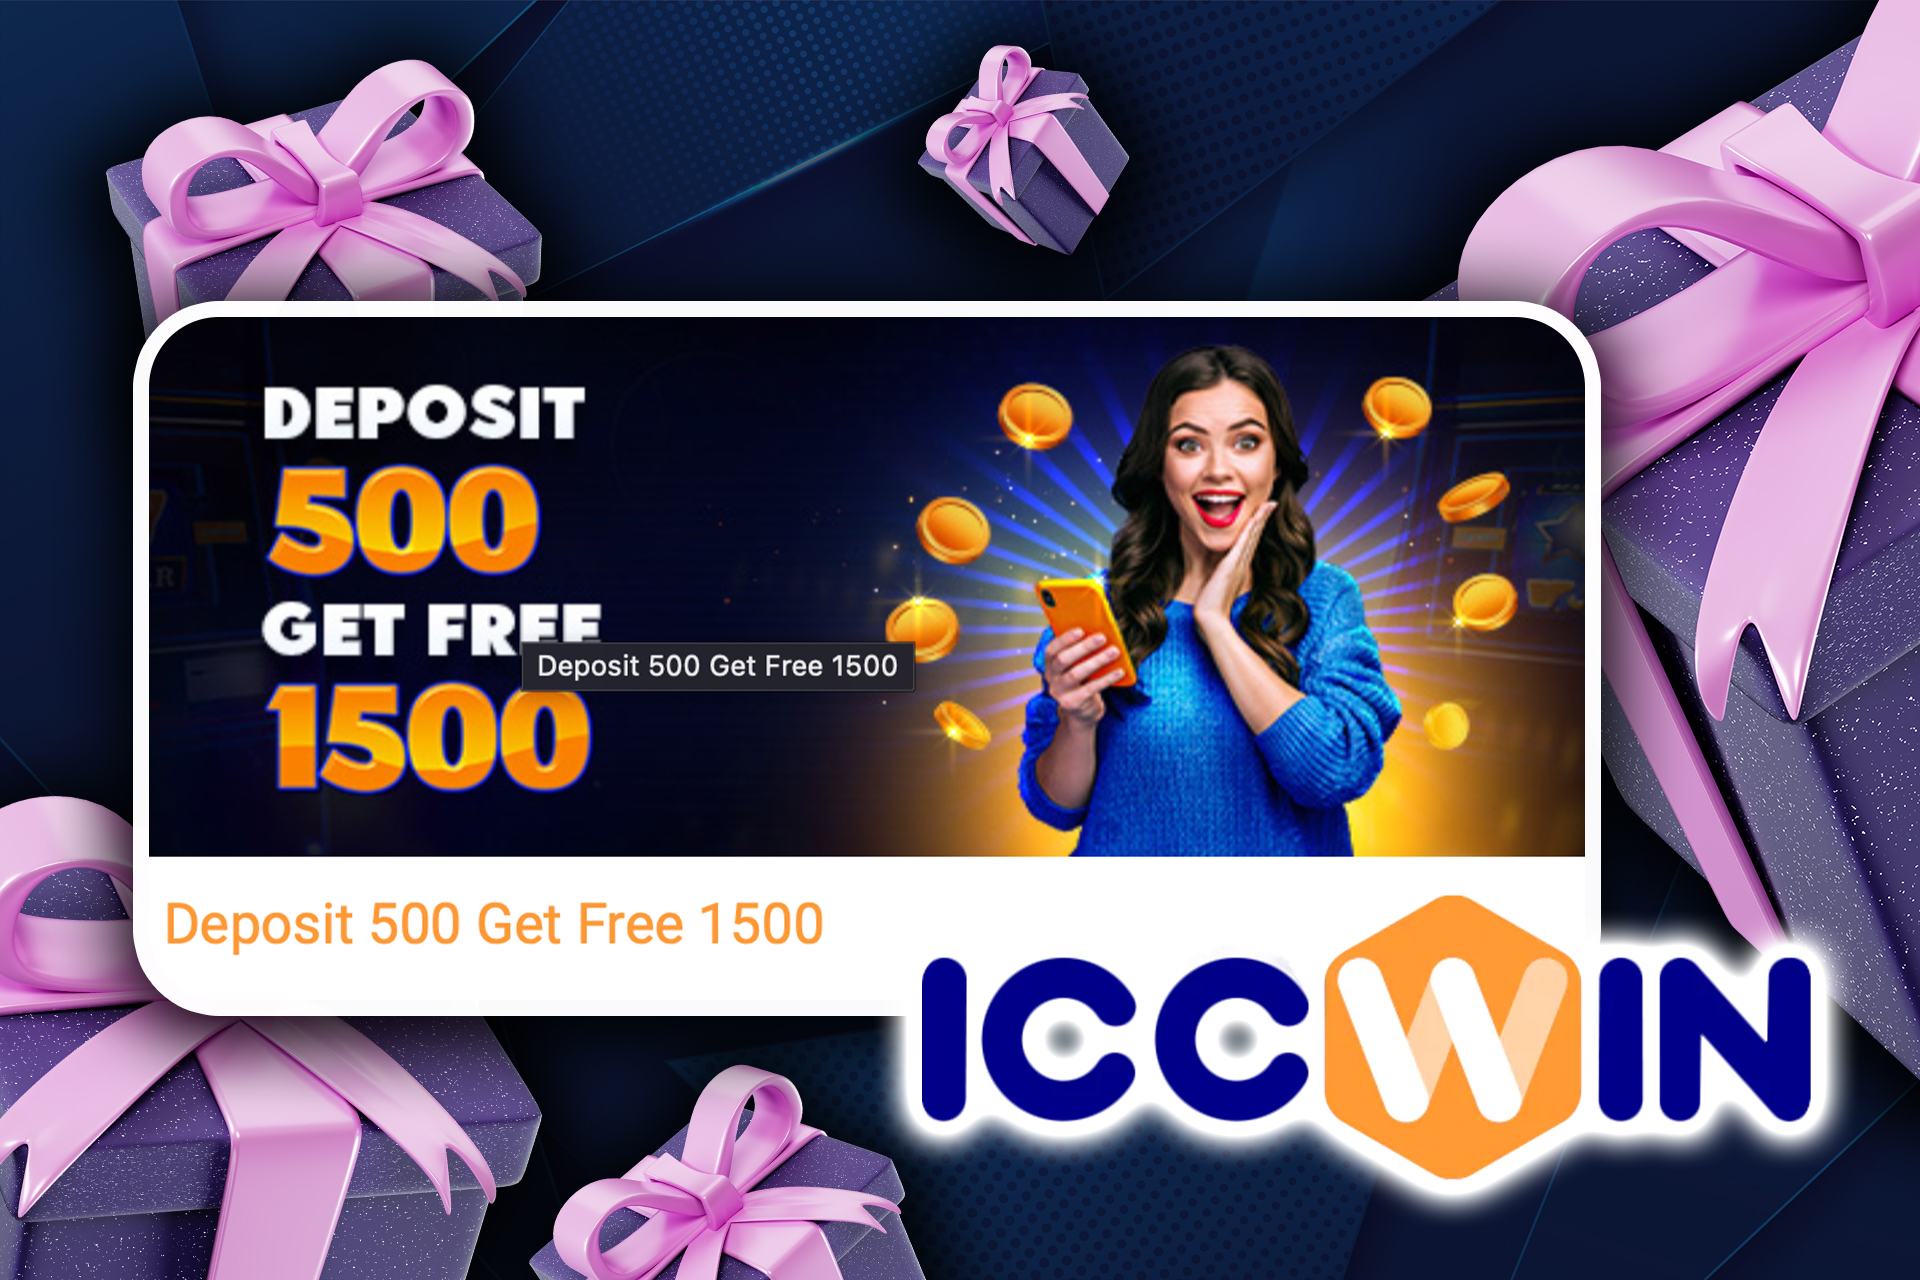 Join the referral program on ICCWIN and get additional